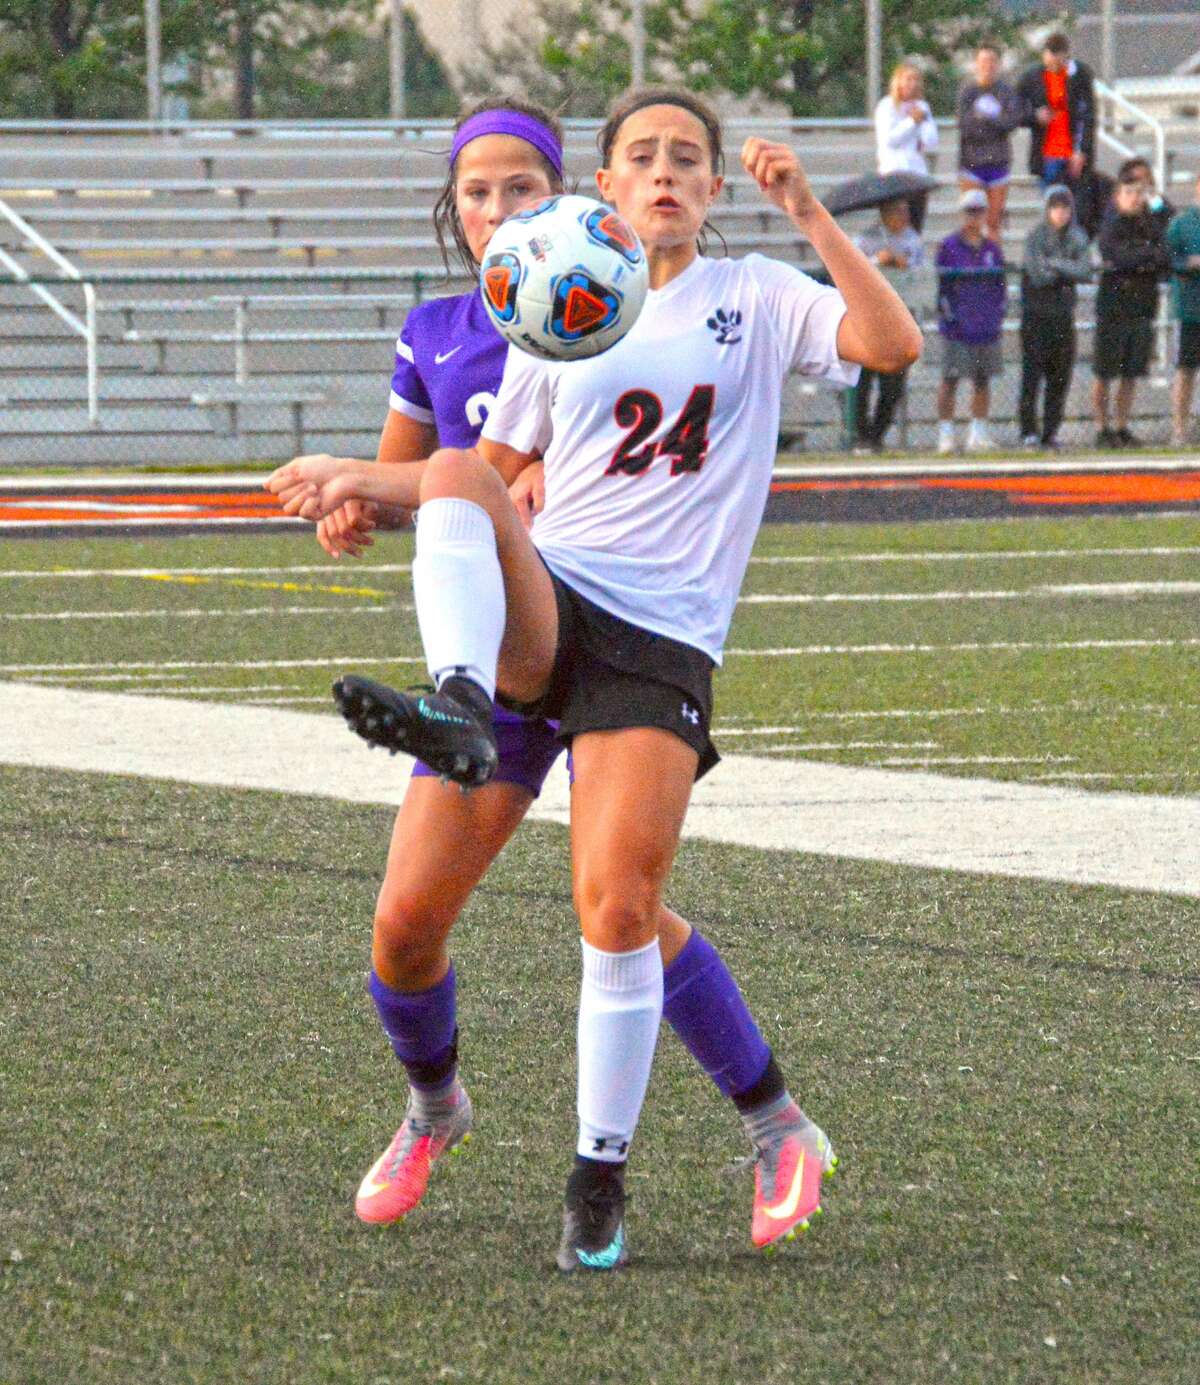 Edwardsville freshman forward Sydni Stevens, front, plays a ball from a throw-in midway through the first half of Tuesday’s game against Collinsville.